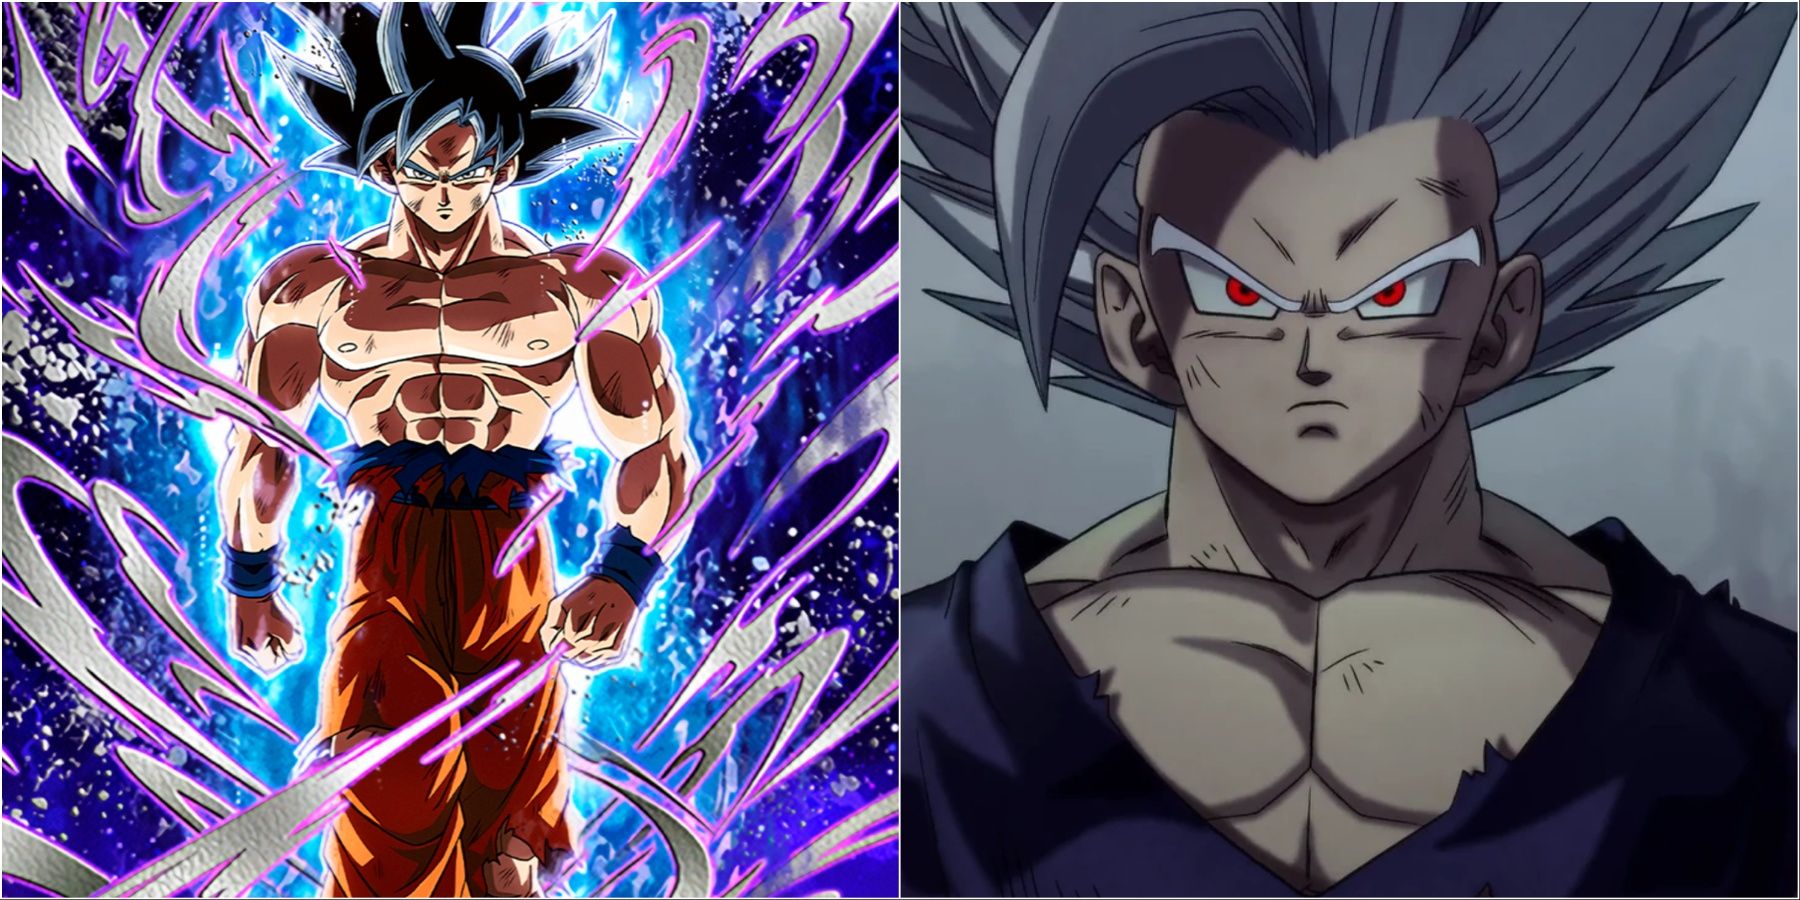 Forms Goku Needs to Defeat These Characters, Dbs